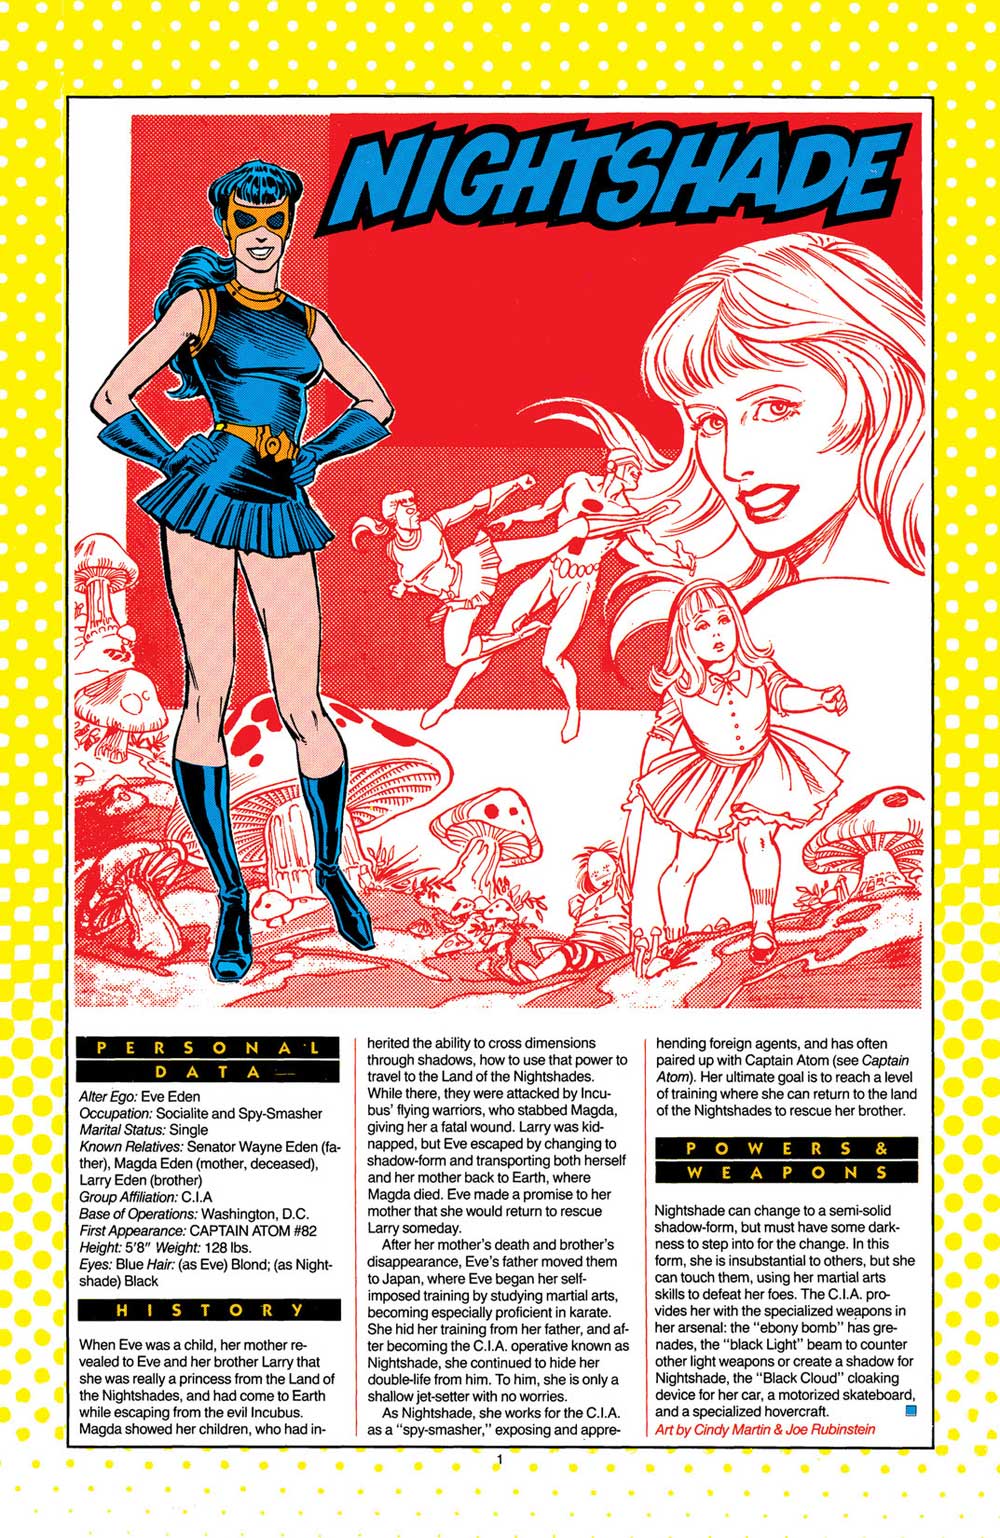 Who's Who: The Definitive Directory of the DC Universe #17 (July 1986) - art by Cindy Martin & Joe Rubinstein